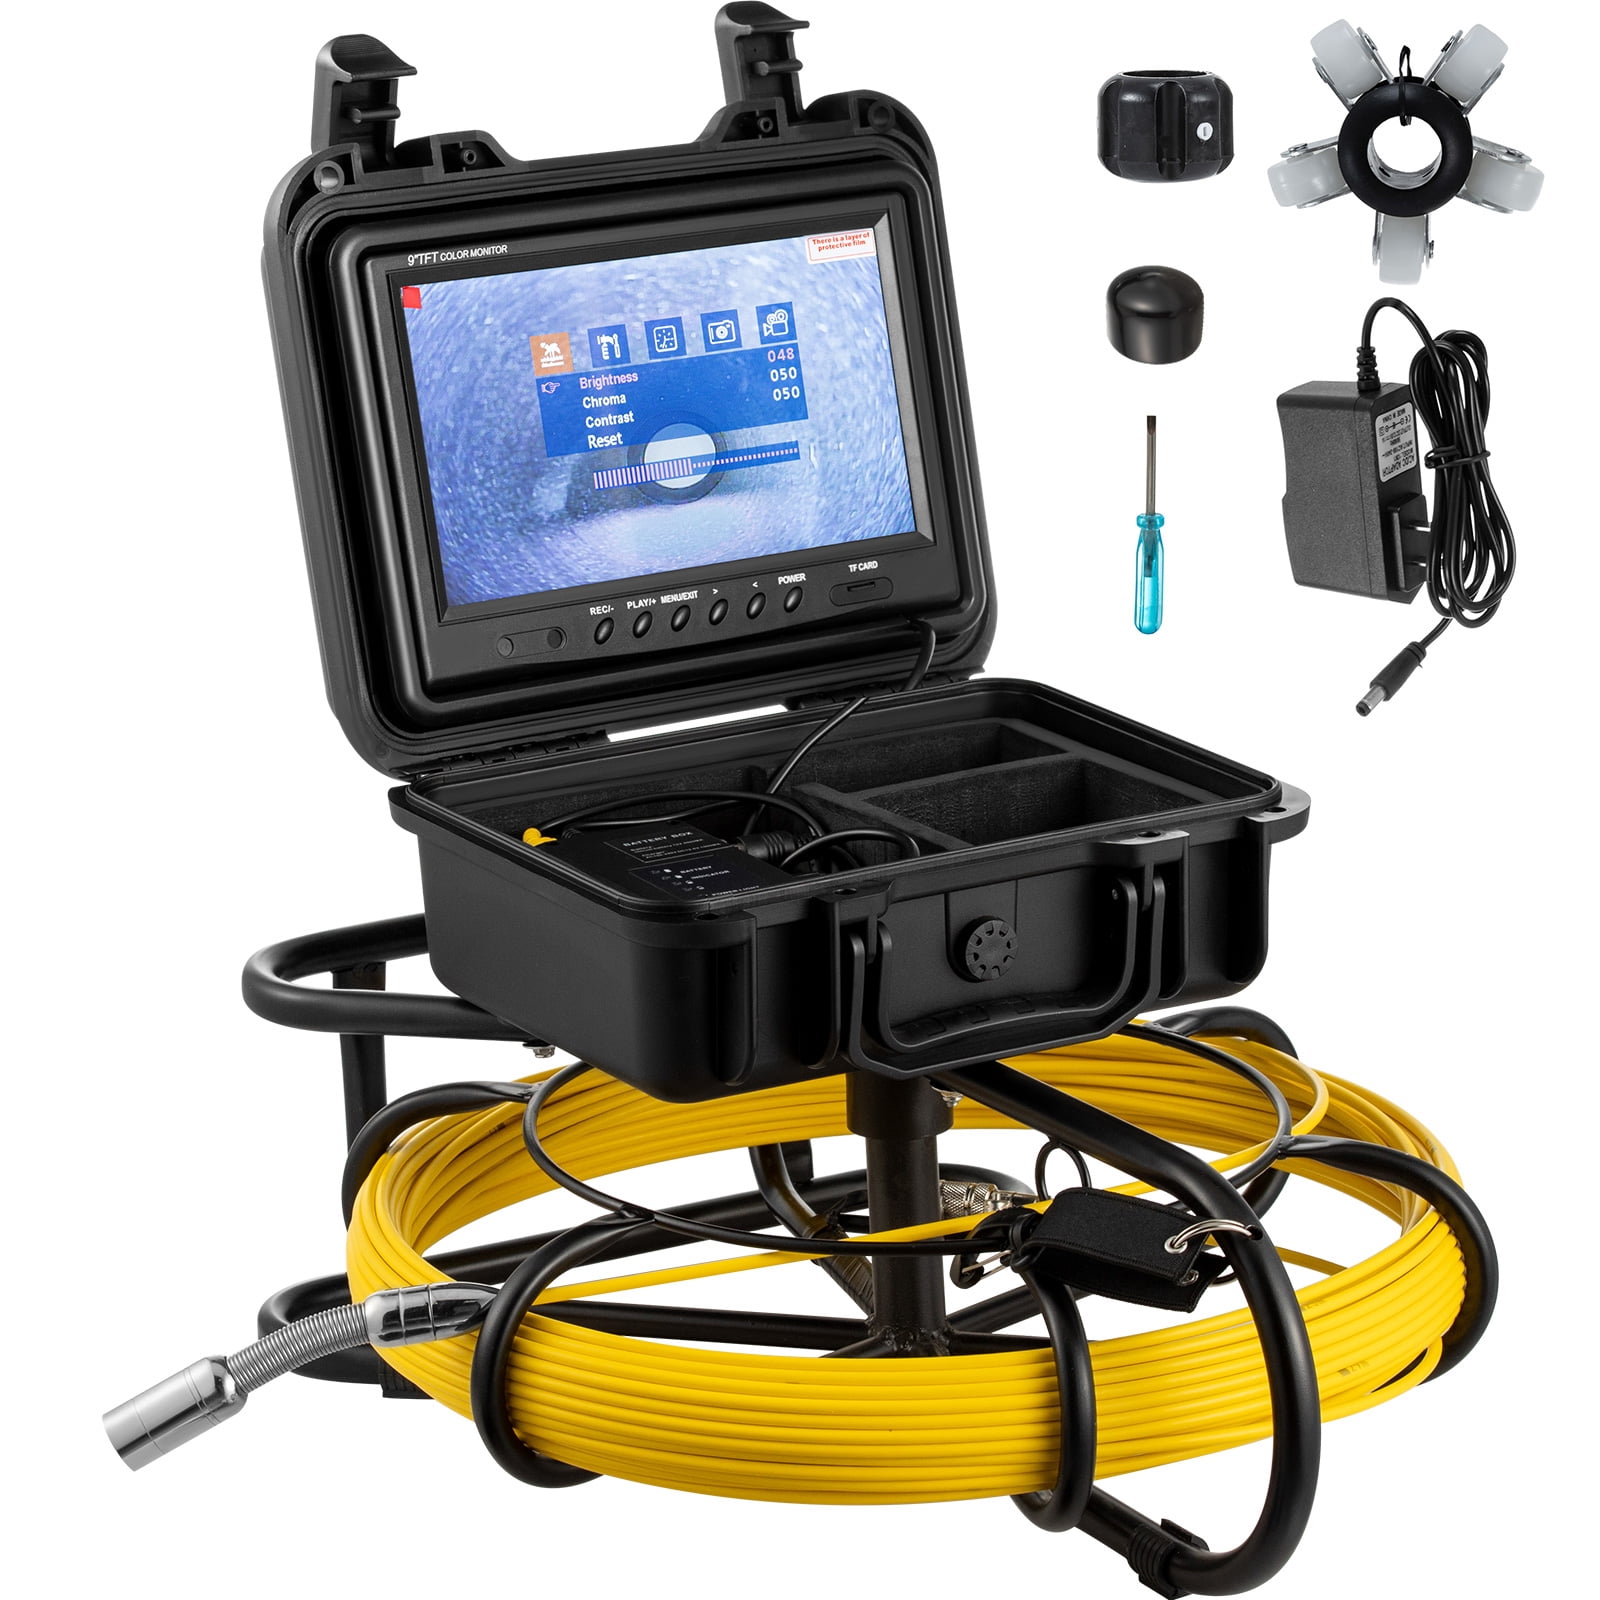 Details about   NEW 30M Sewer Waterproof Camera 7" LCD Pipe Pipeline Drain Inspection System DVR 